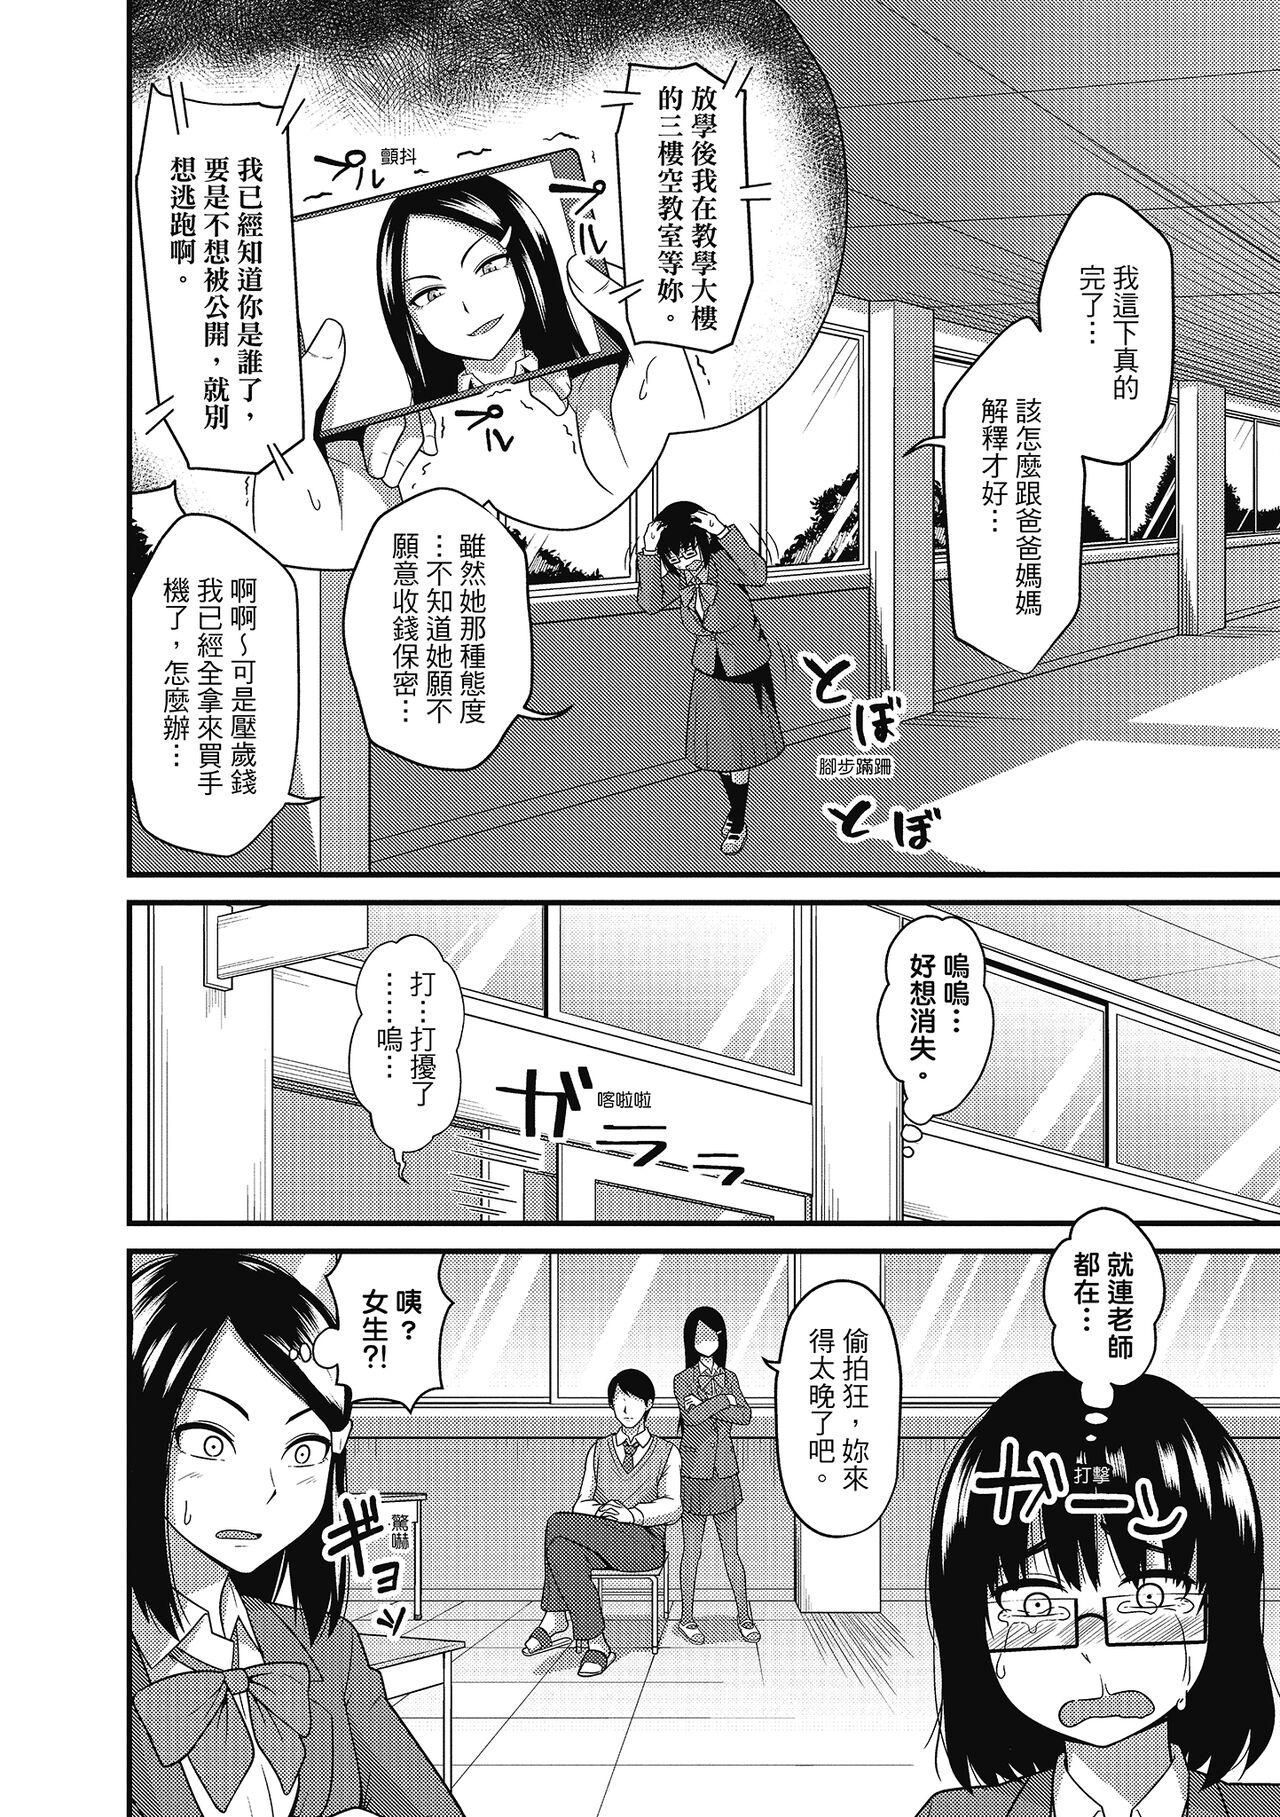 Awesome Pakohame Party | 與人連結的啪啪派對 Chichona - Page 8